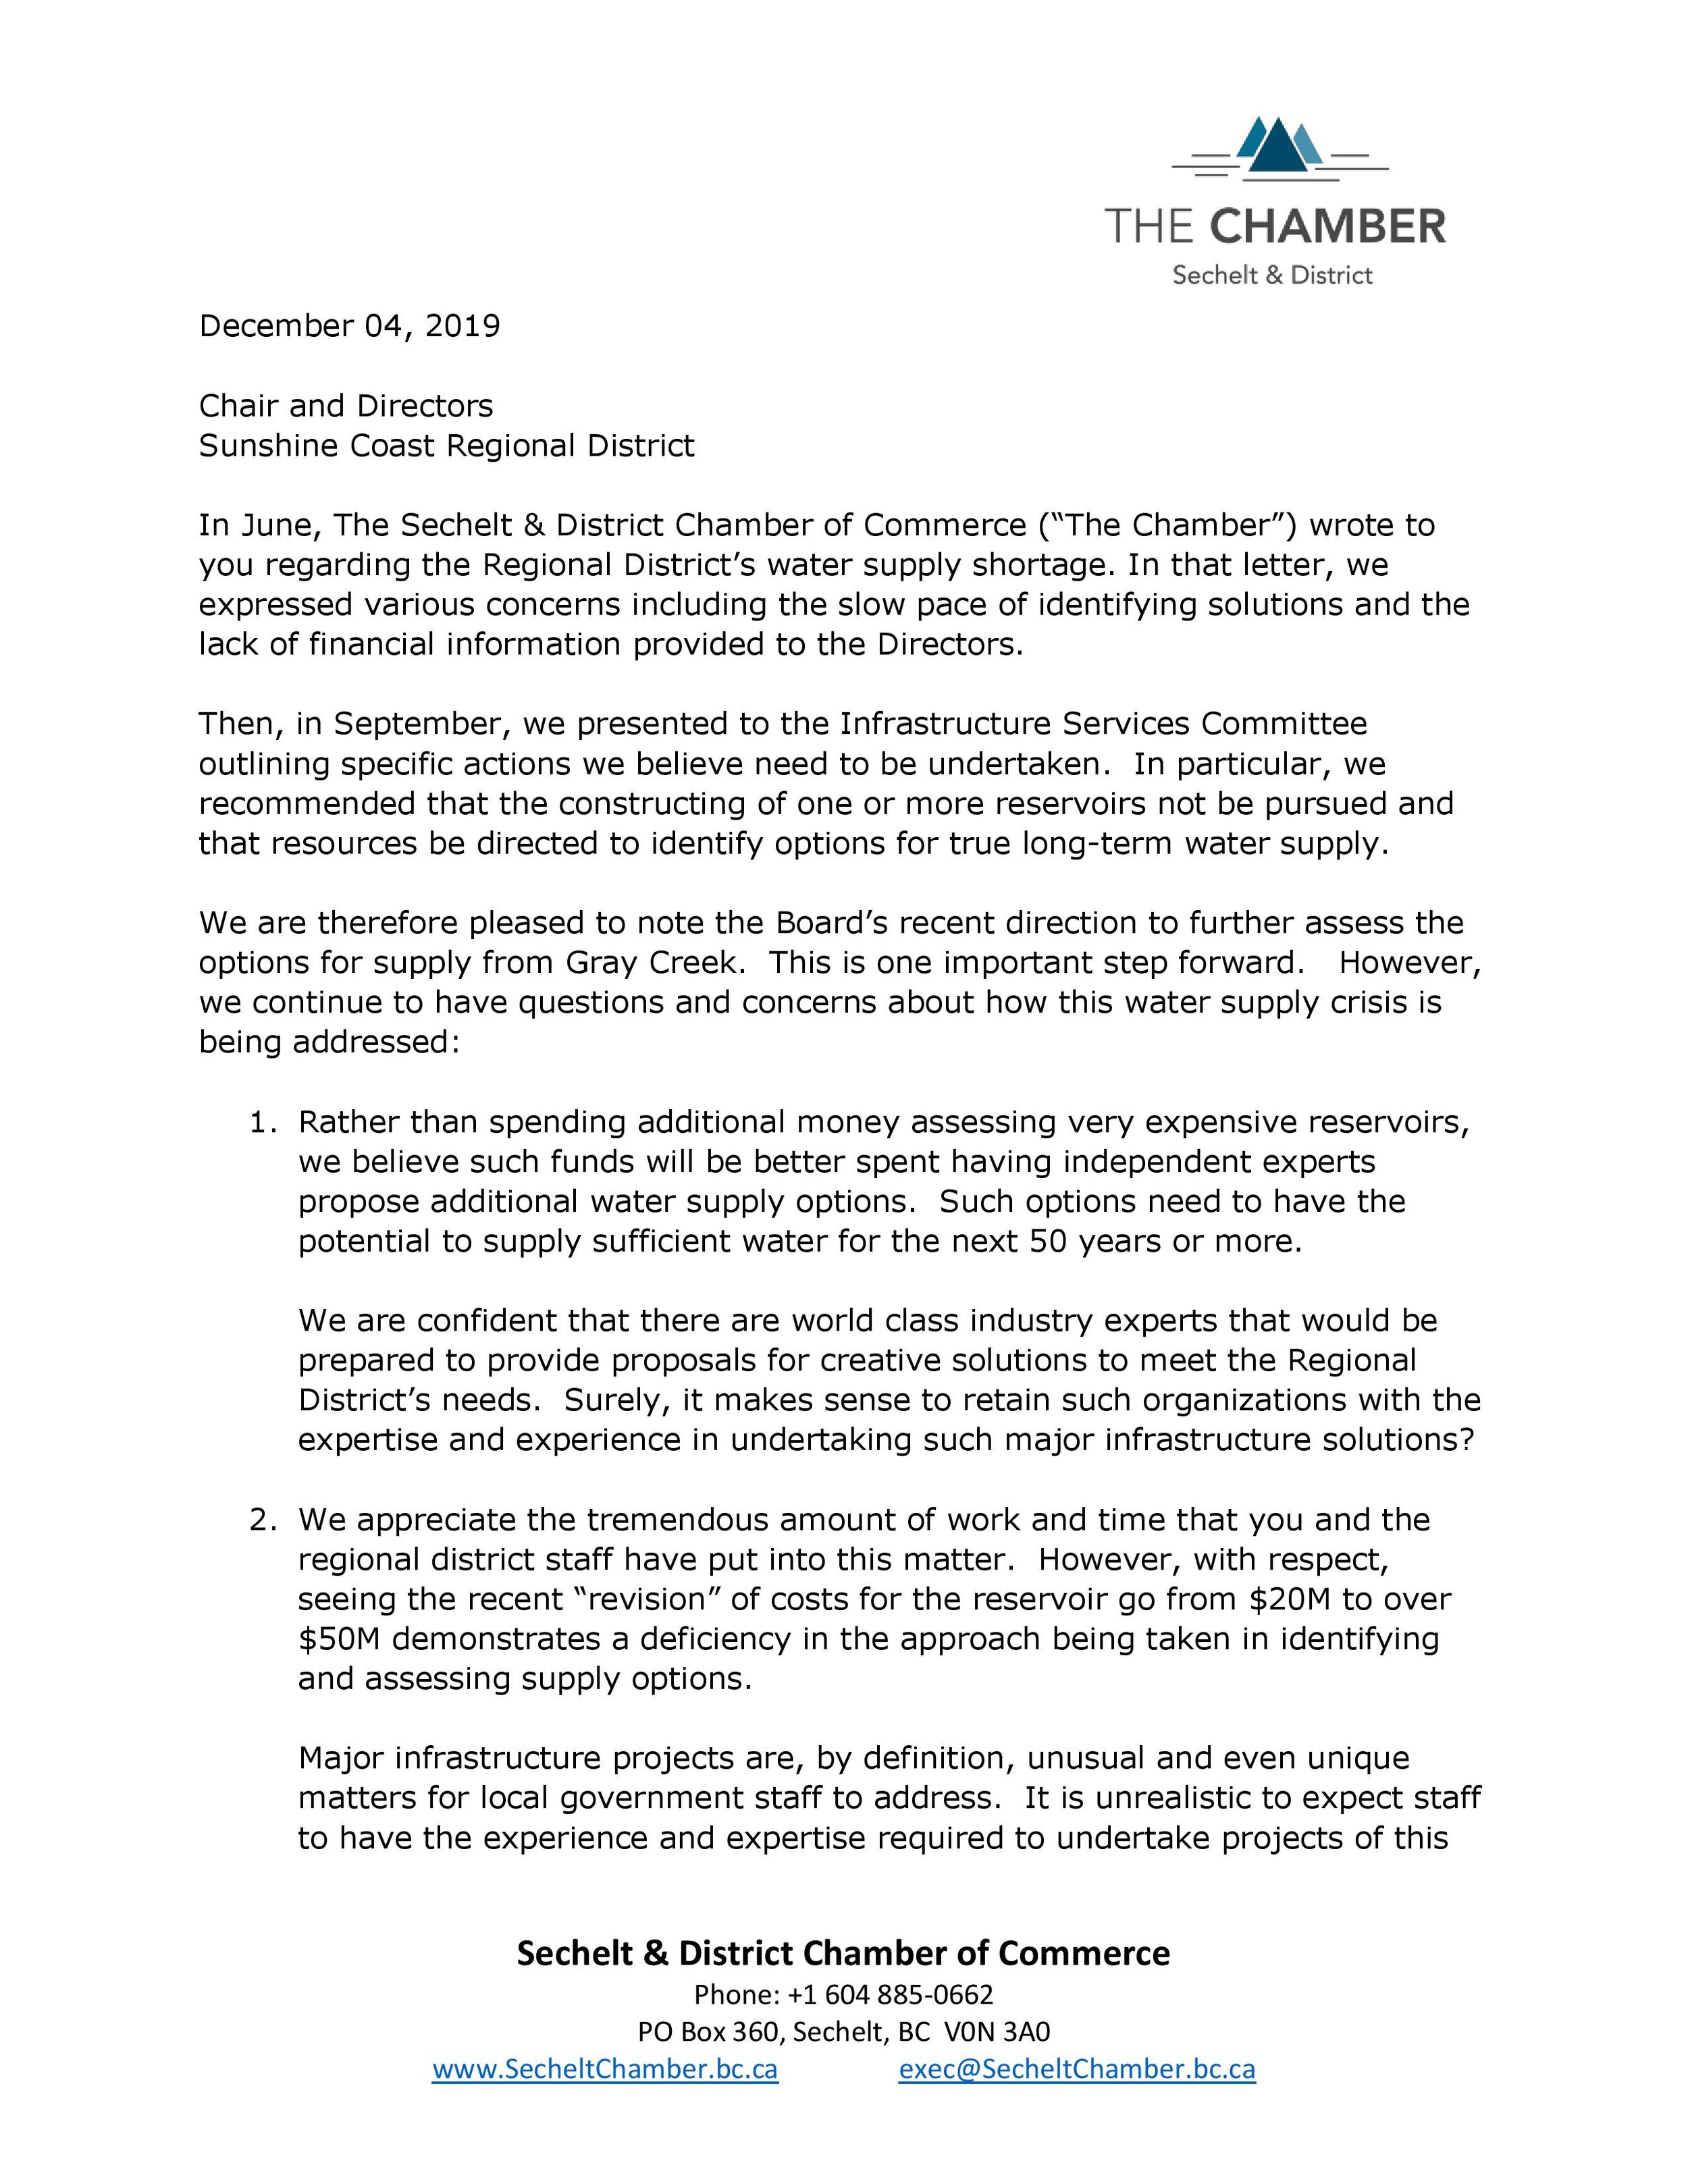 Sechelt Chamber to SCRD - re water supply process - 2019 12 04-page-001.jpg